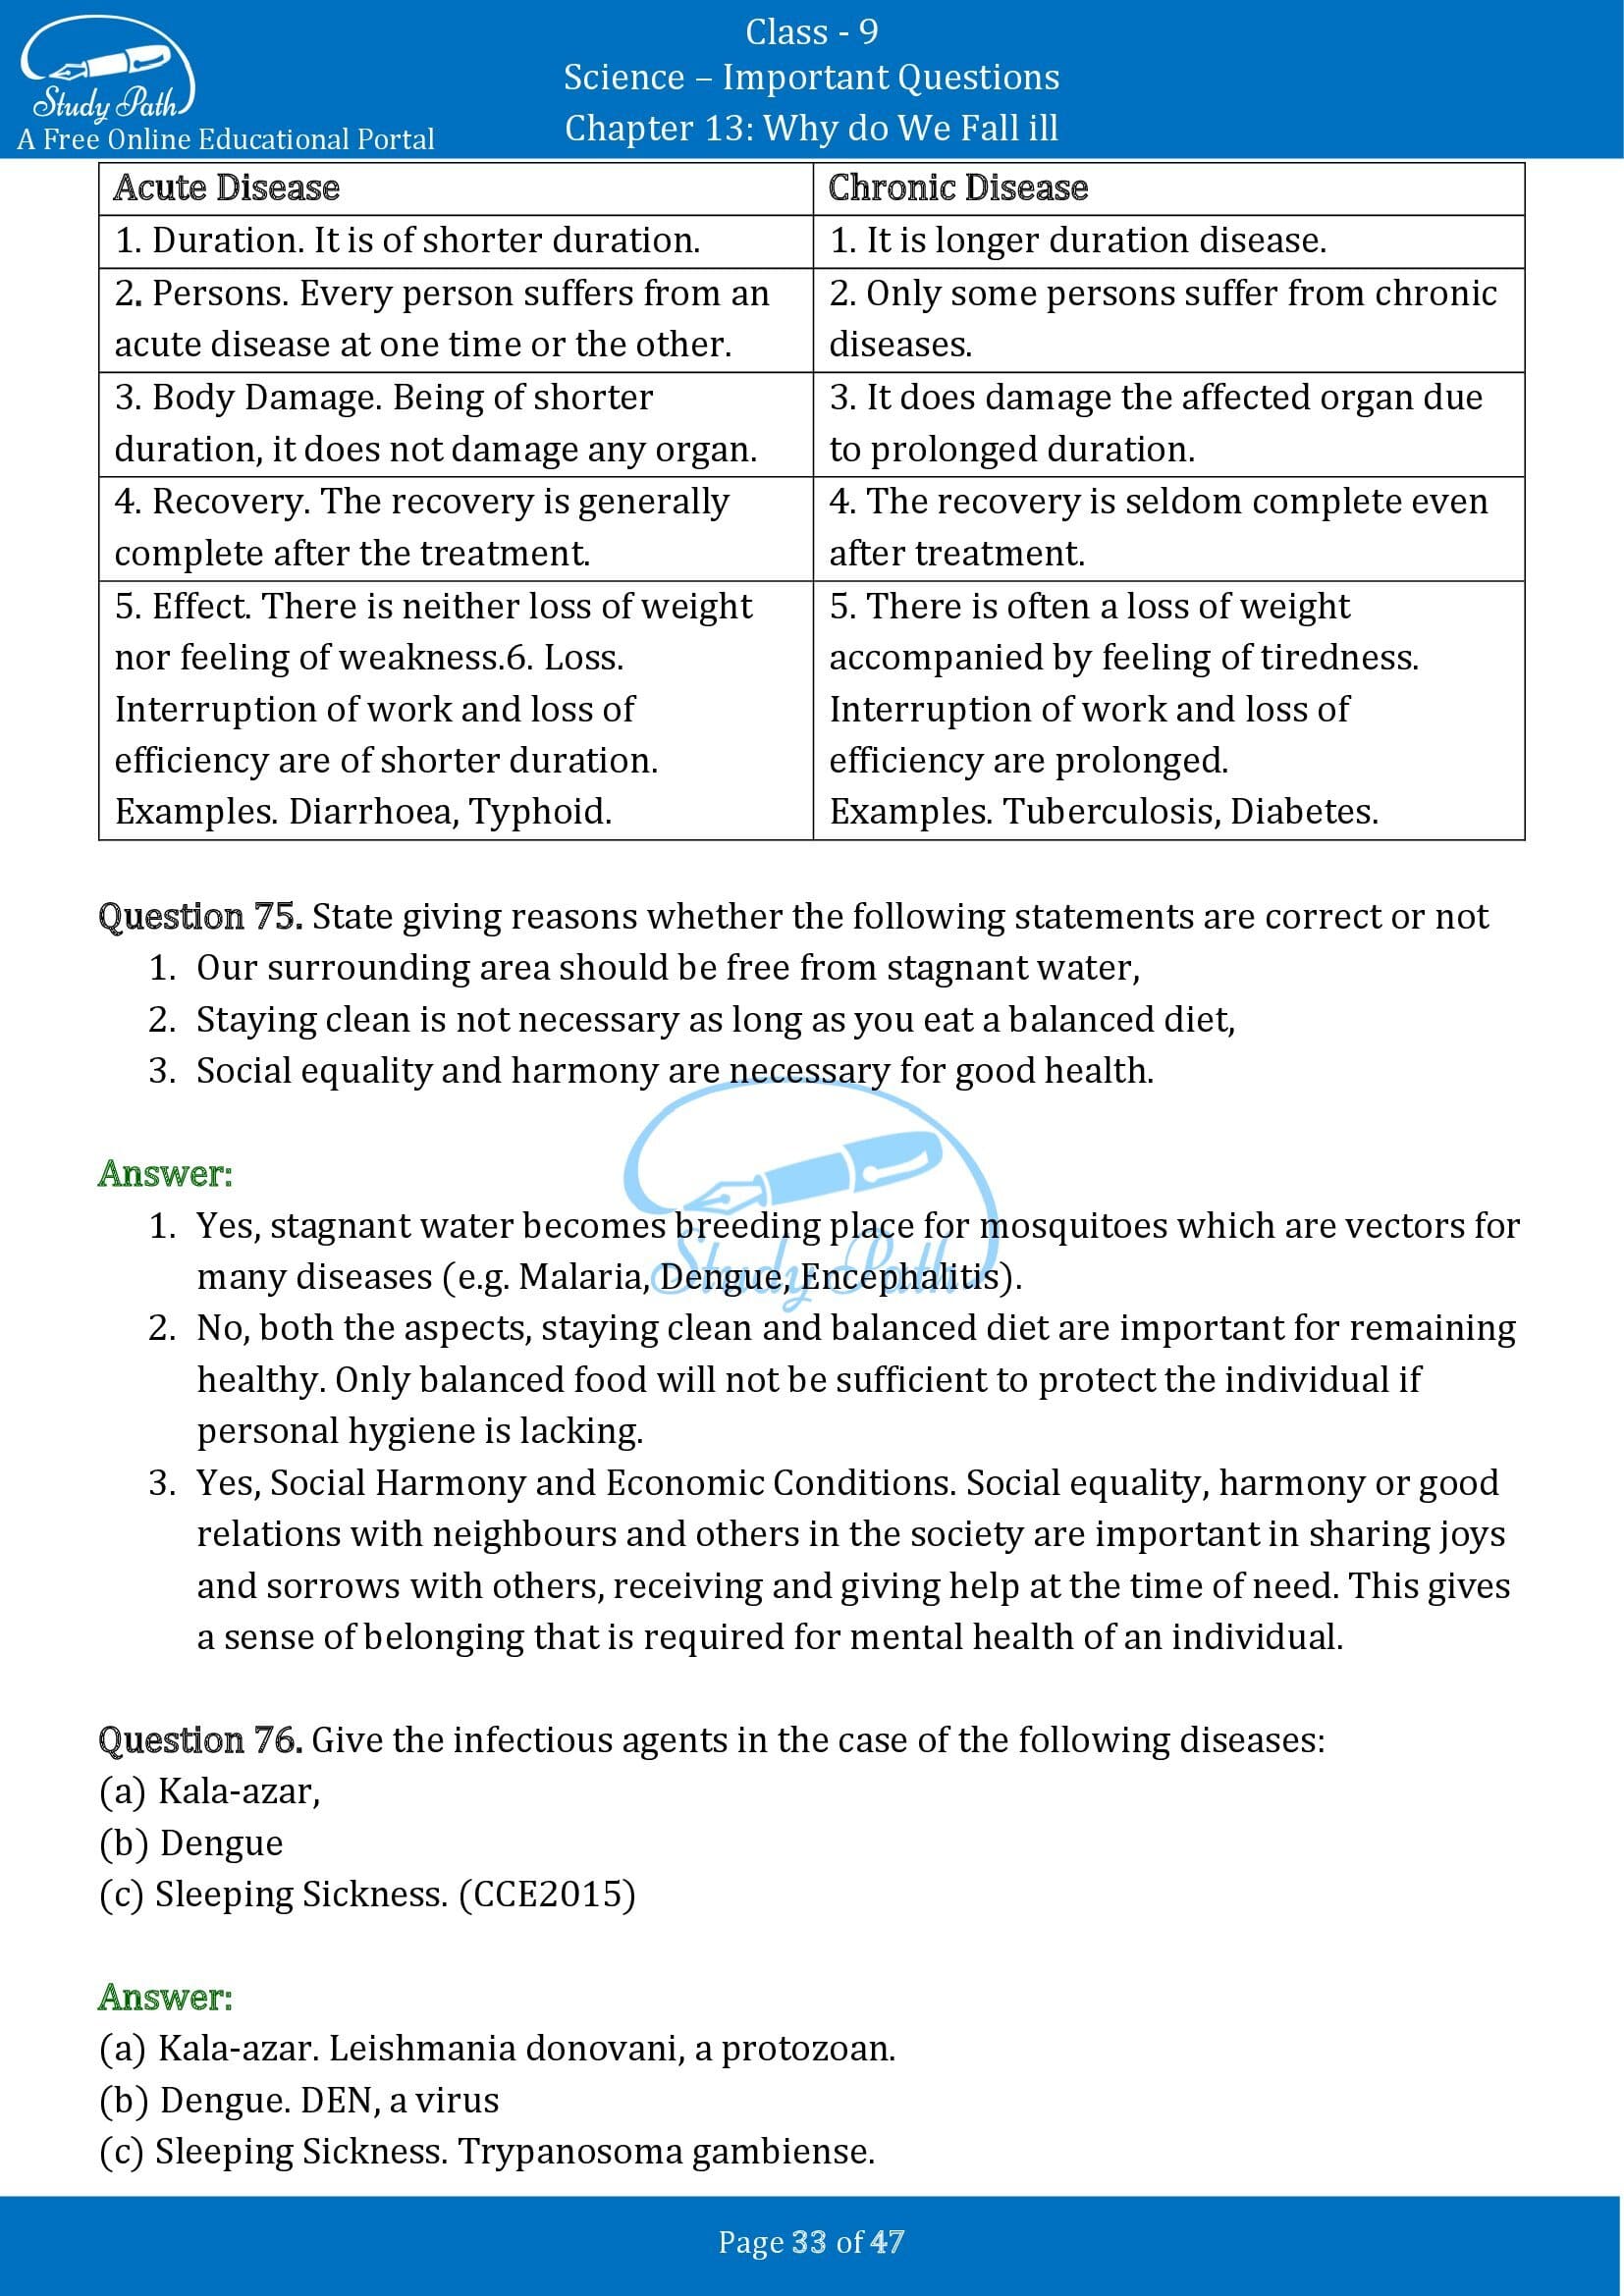 Important Questions for Class 9 Science Chapter 13 Why do We Fall ill 00033